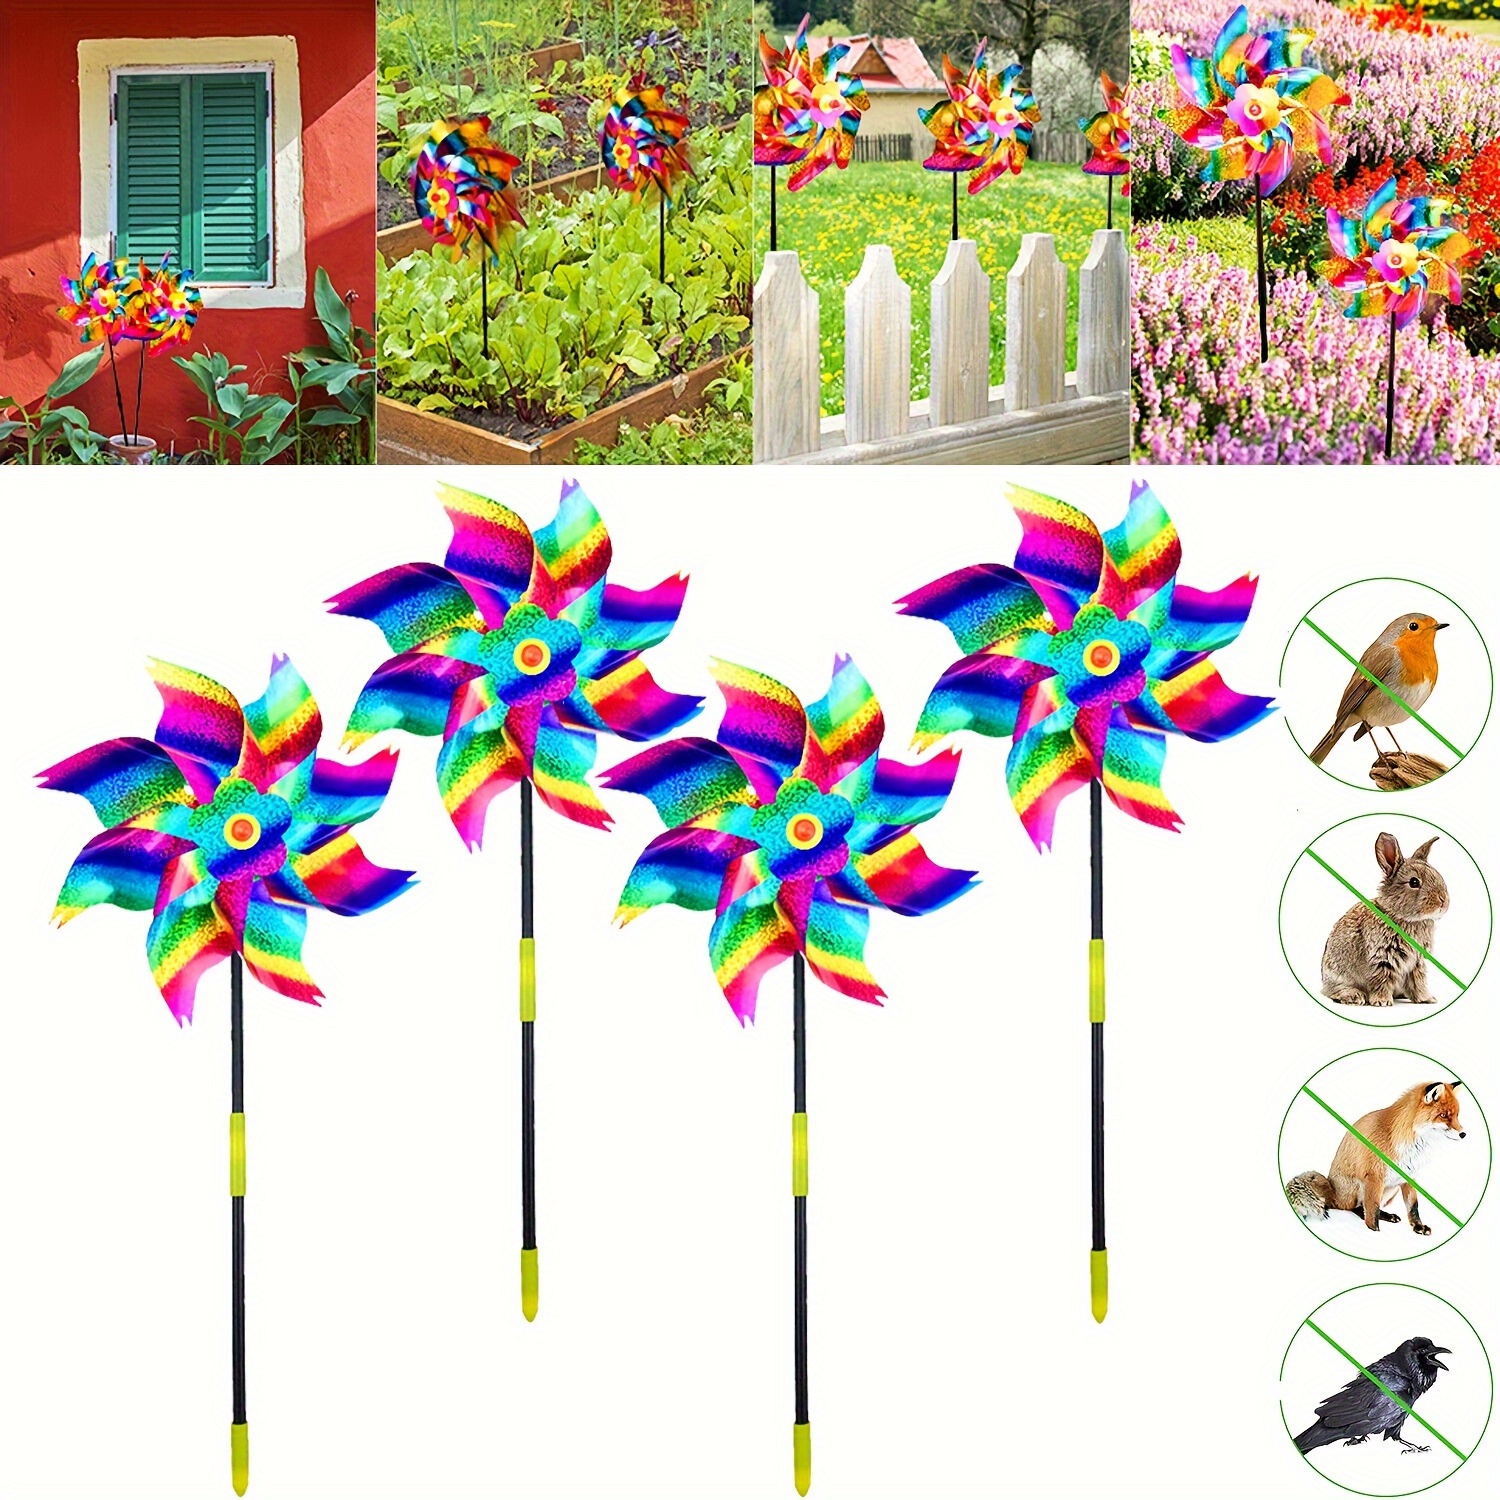 

4 Packs, Reflective Pinwheels With Stakes, Extra Sparkly Pinwheel For Garden Decor, Bird Devices Deterrent To Scare Birds Away From Yard Patio Farm